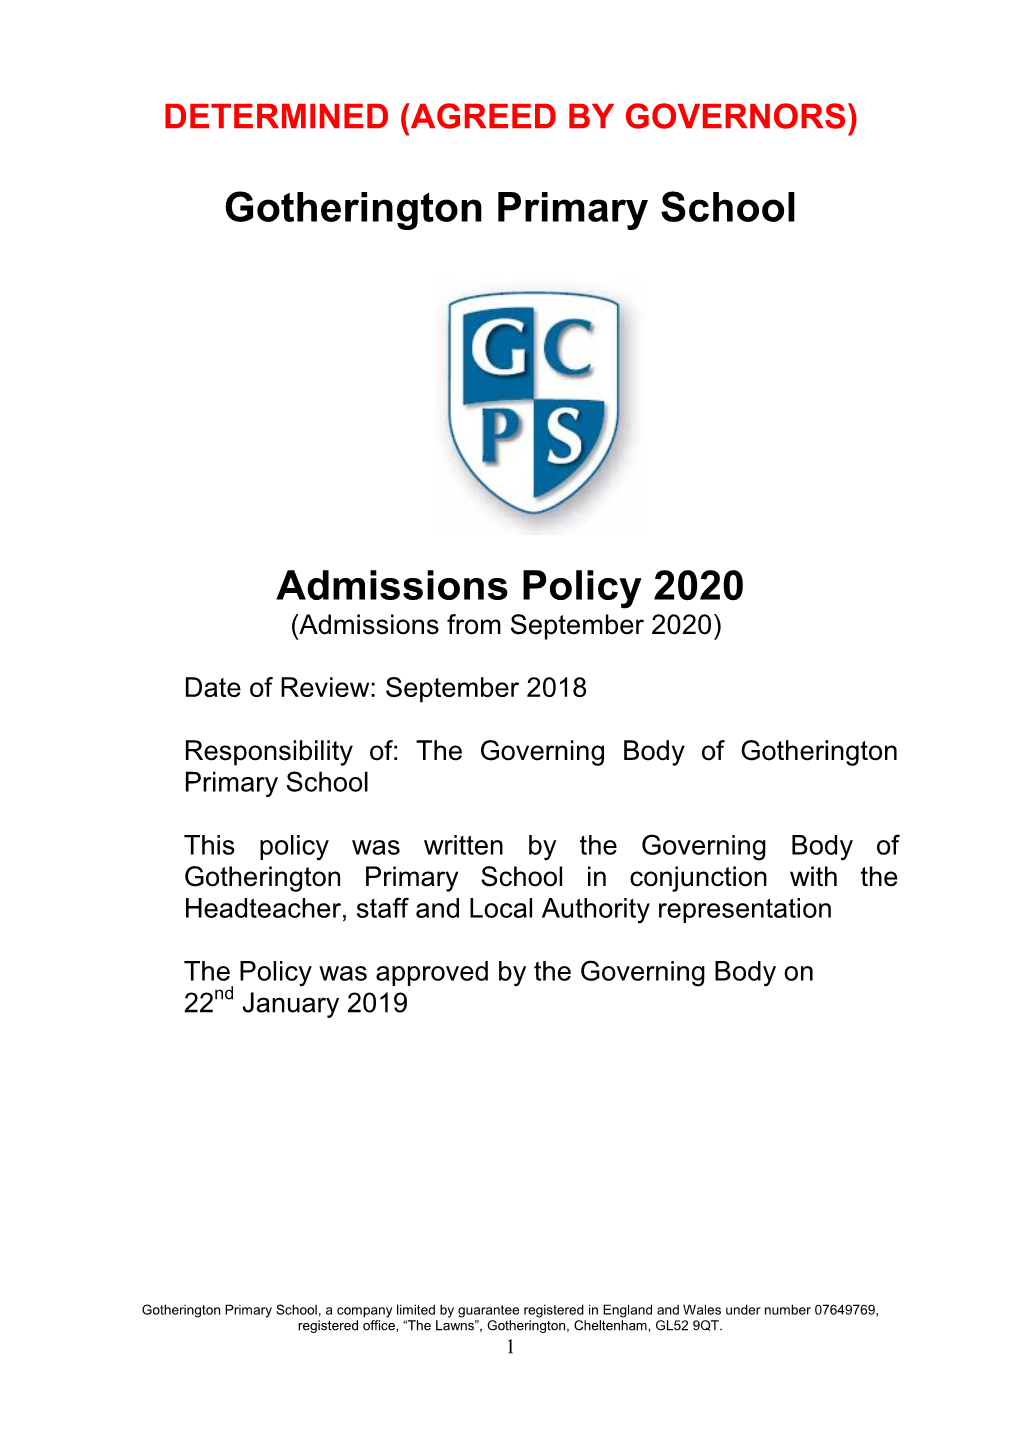 Gotherington Primary School Admissions Policy 2020